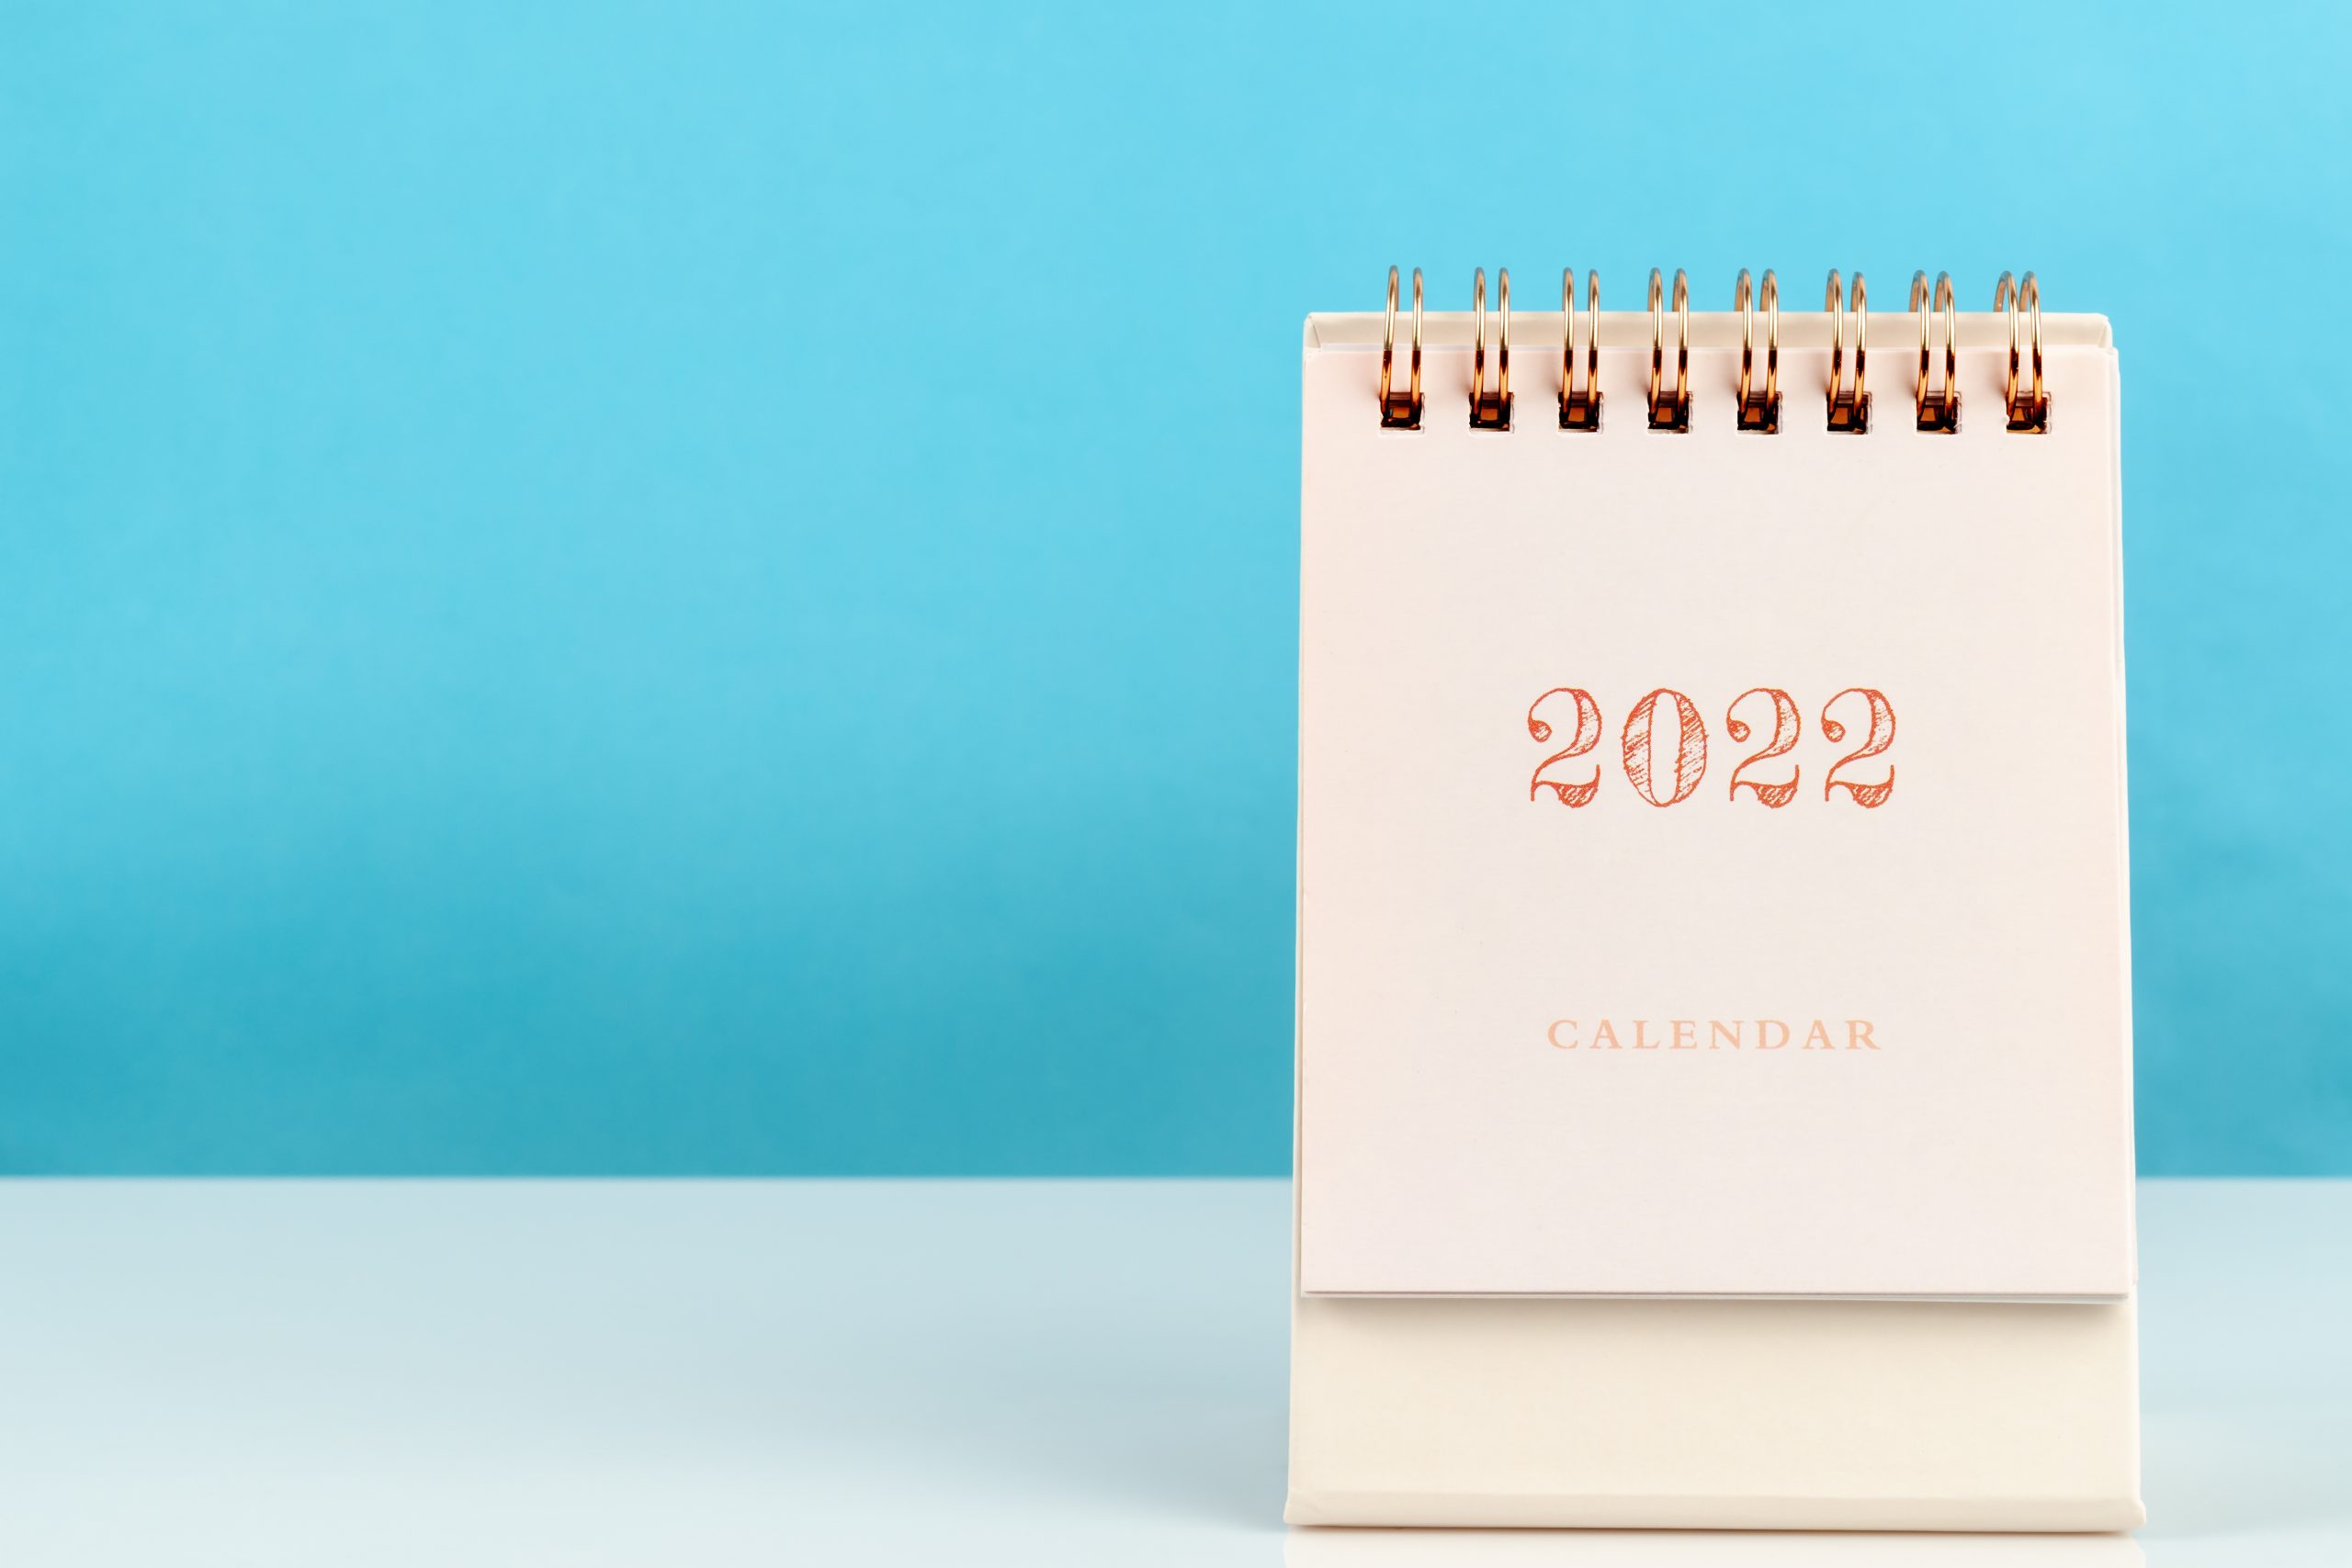 Calendar Desk 2022 For Organizer To Plan And Reminder On Wooden Table With Blue Color Background.